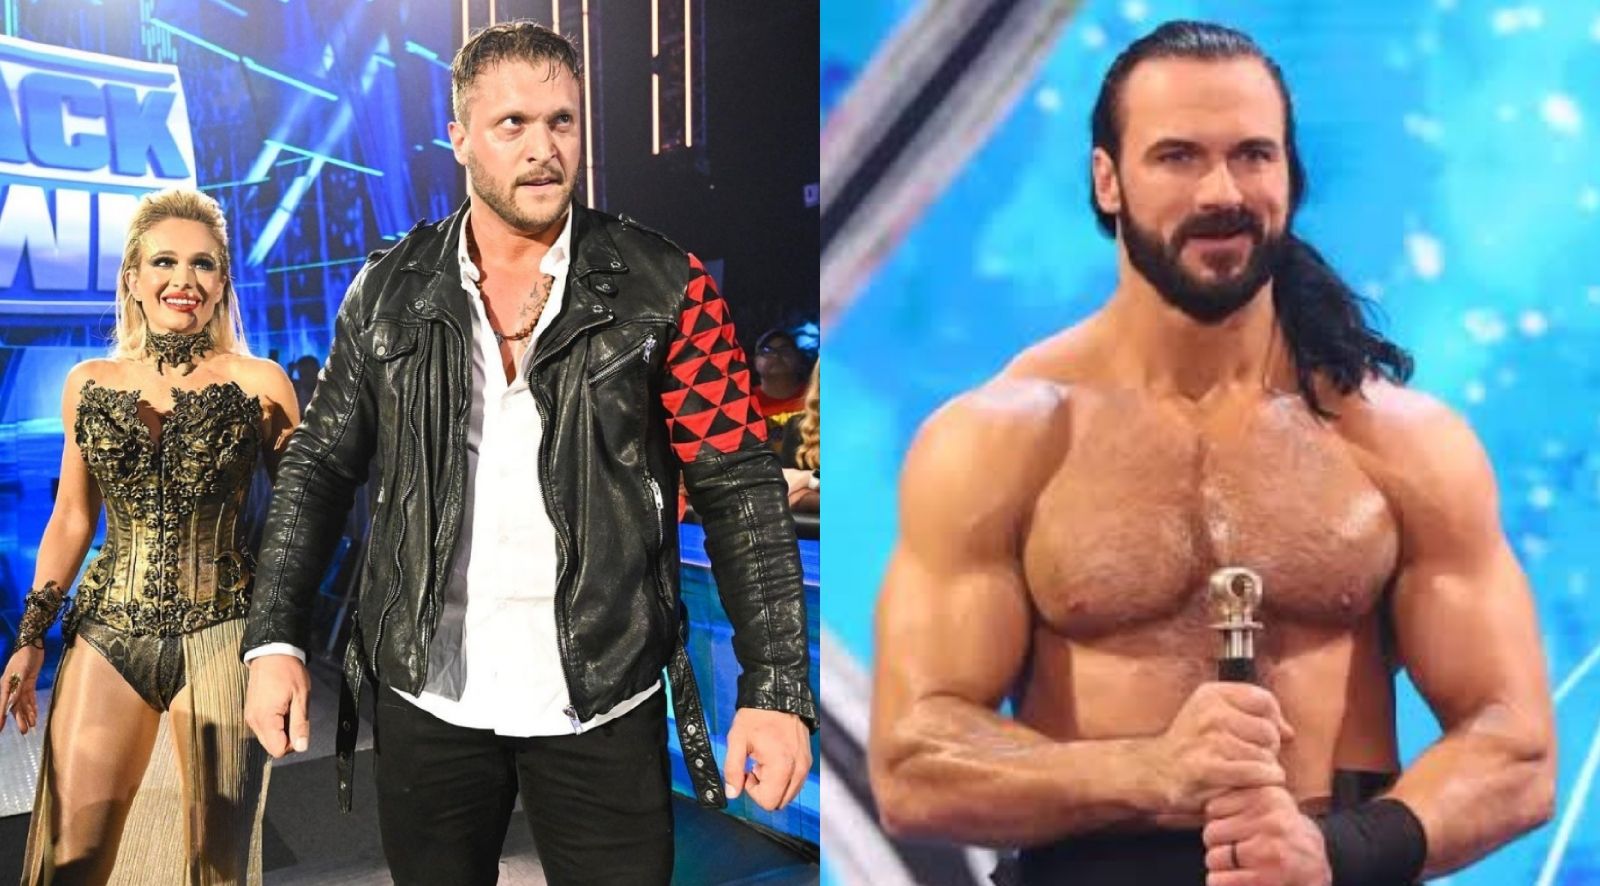 Karrion Kross and Drew McIntyre meet at Extreme Rules